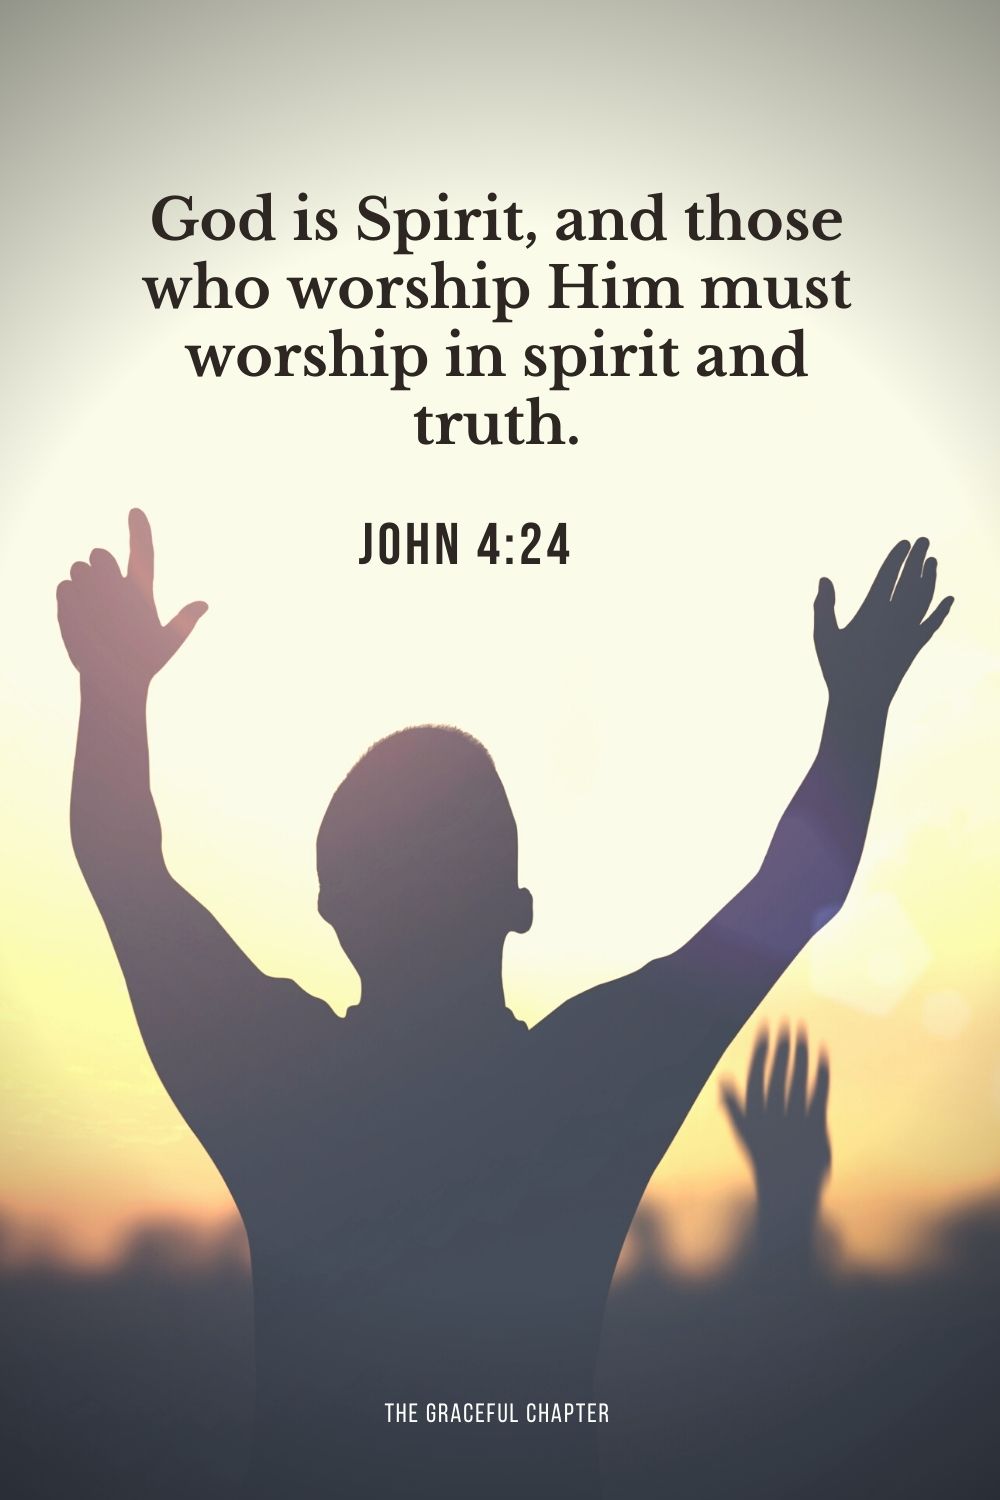 God is Spirit, and those who worship Him must worship in spirit and truth. John 4:24